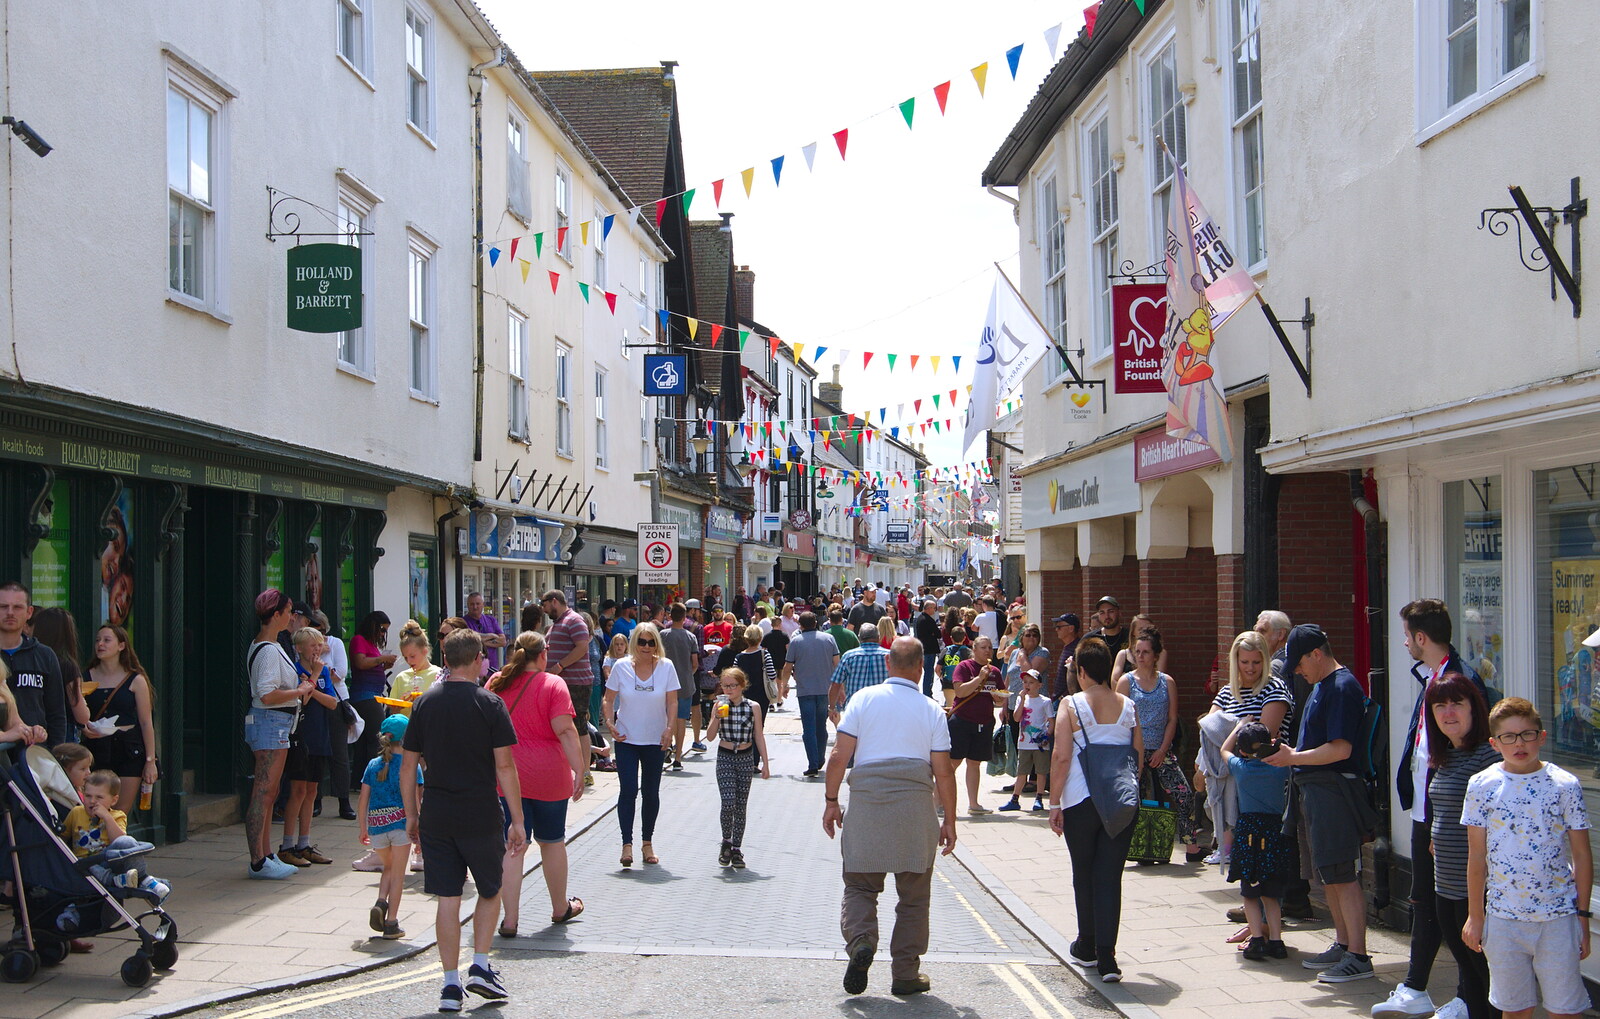 Looking back up Mere Street from The Diss Carnival 2019, Diss, Norfolk - 9th June 2019